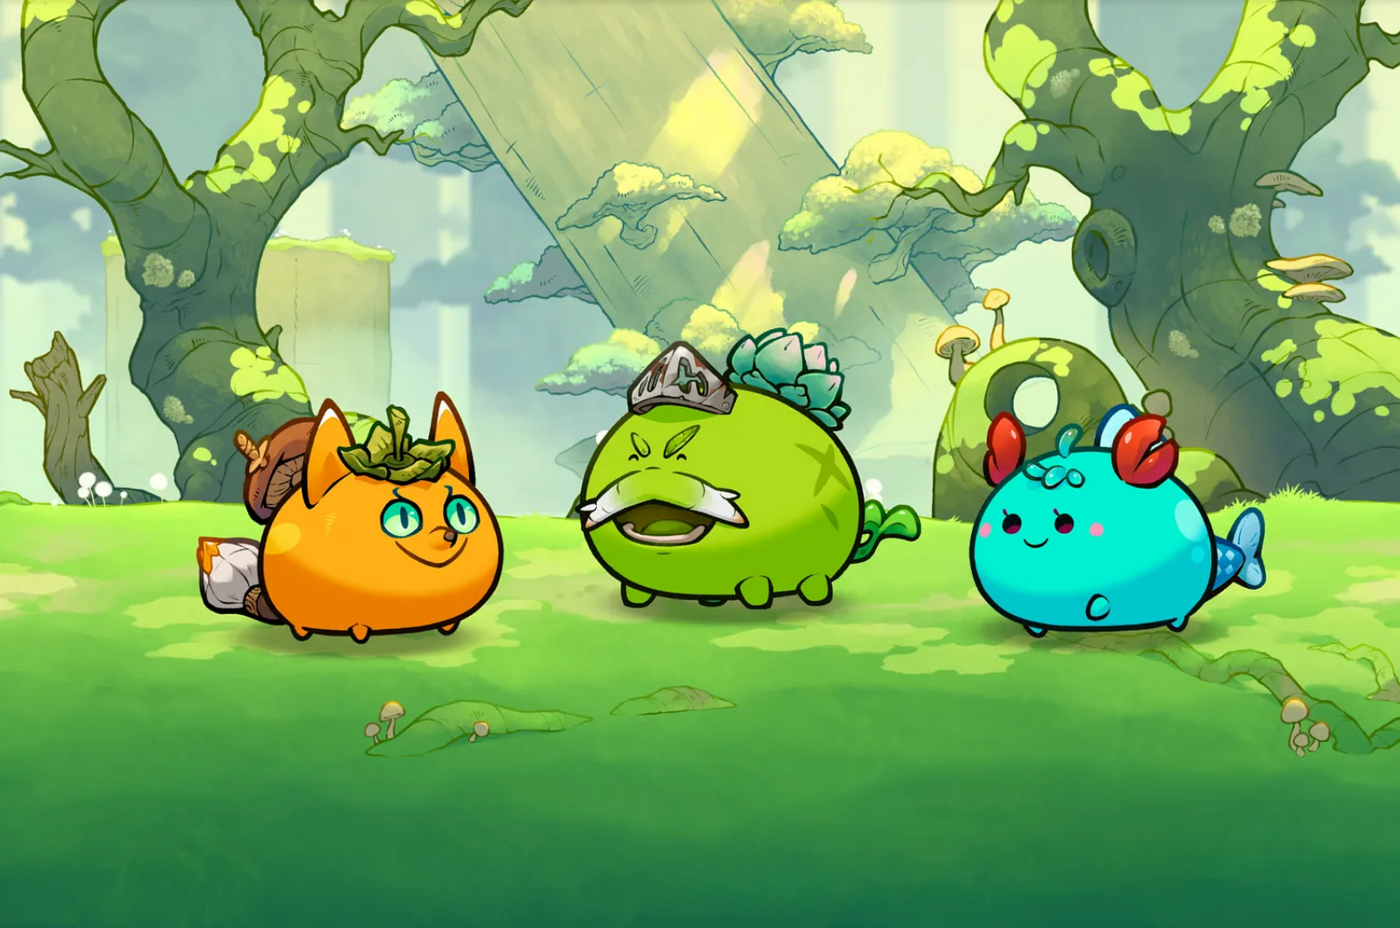 Axie Infinity is the most popular play to earn metaverse game